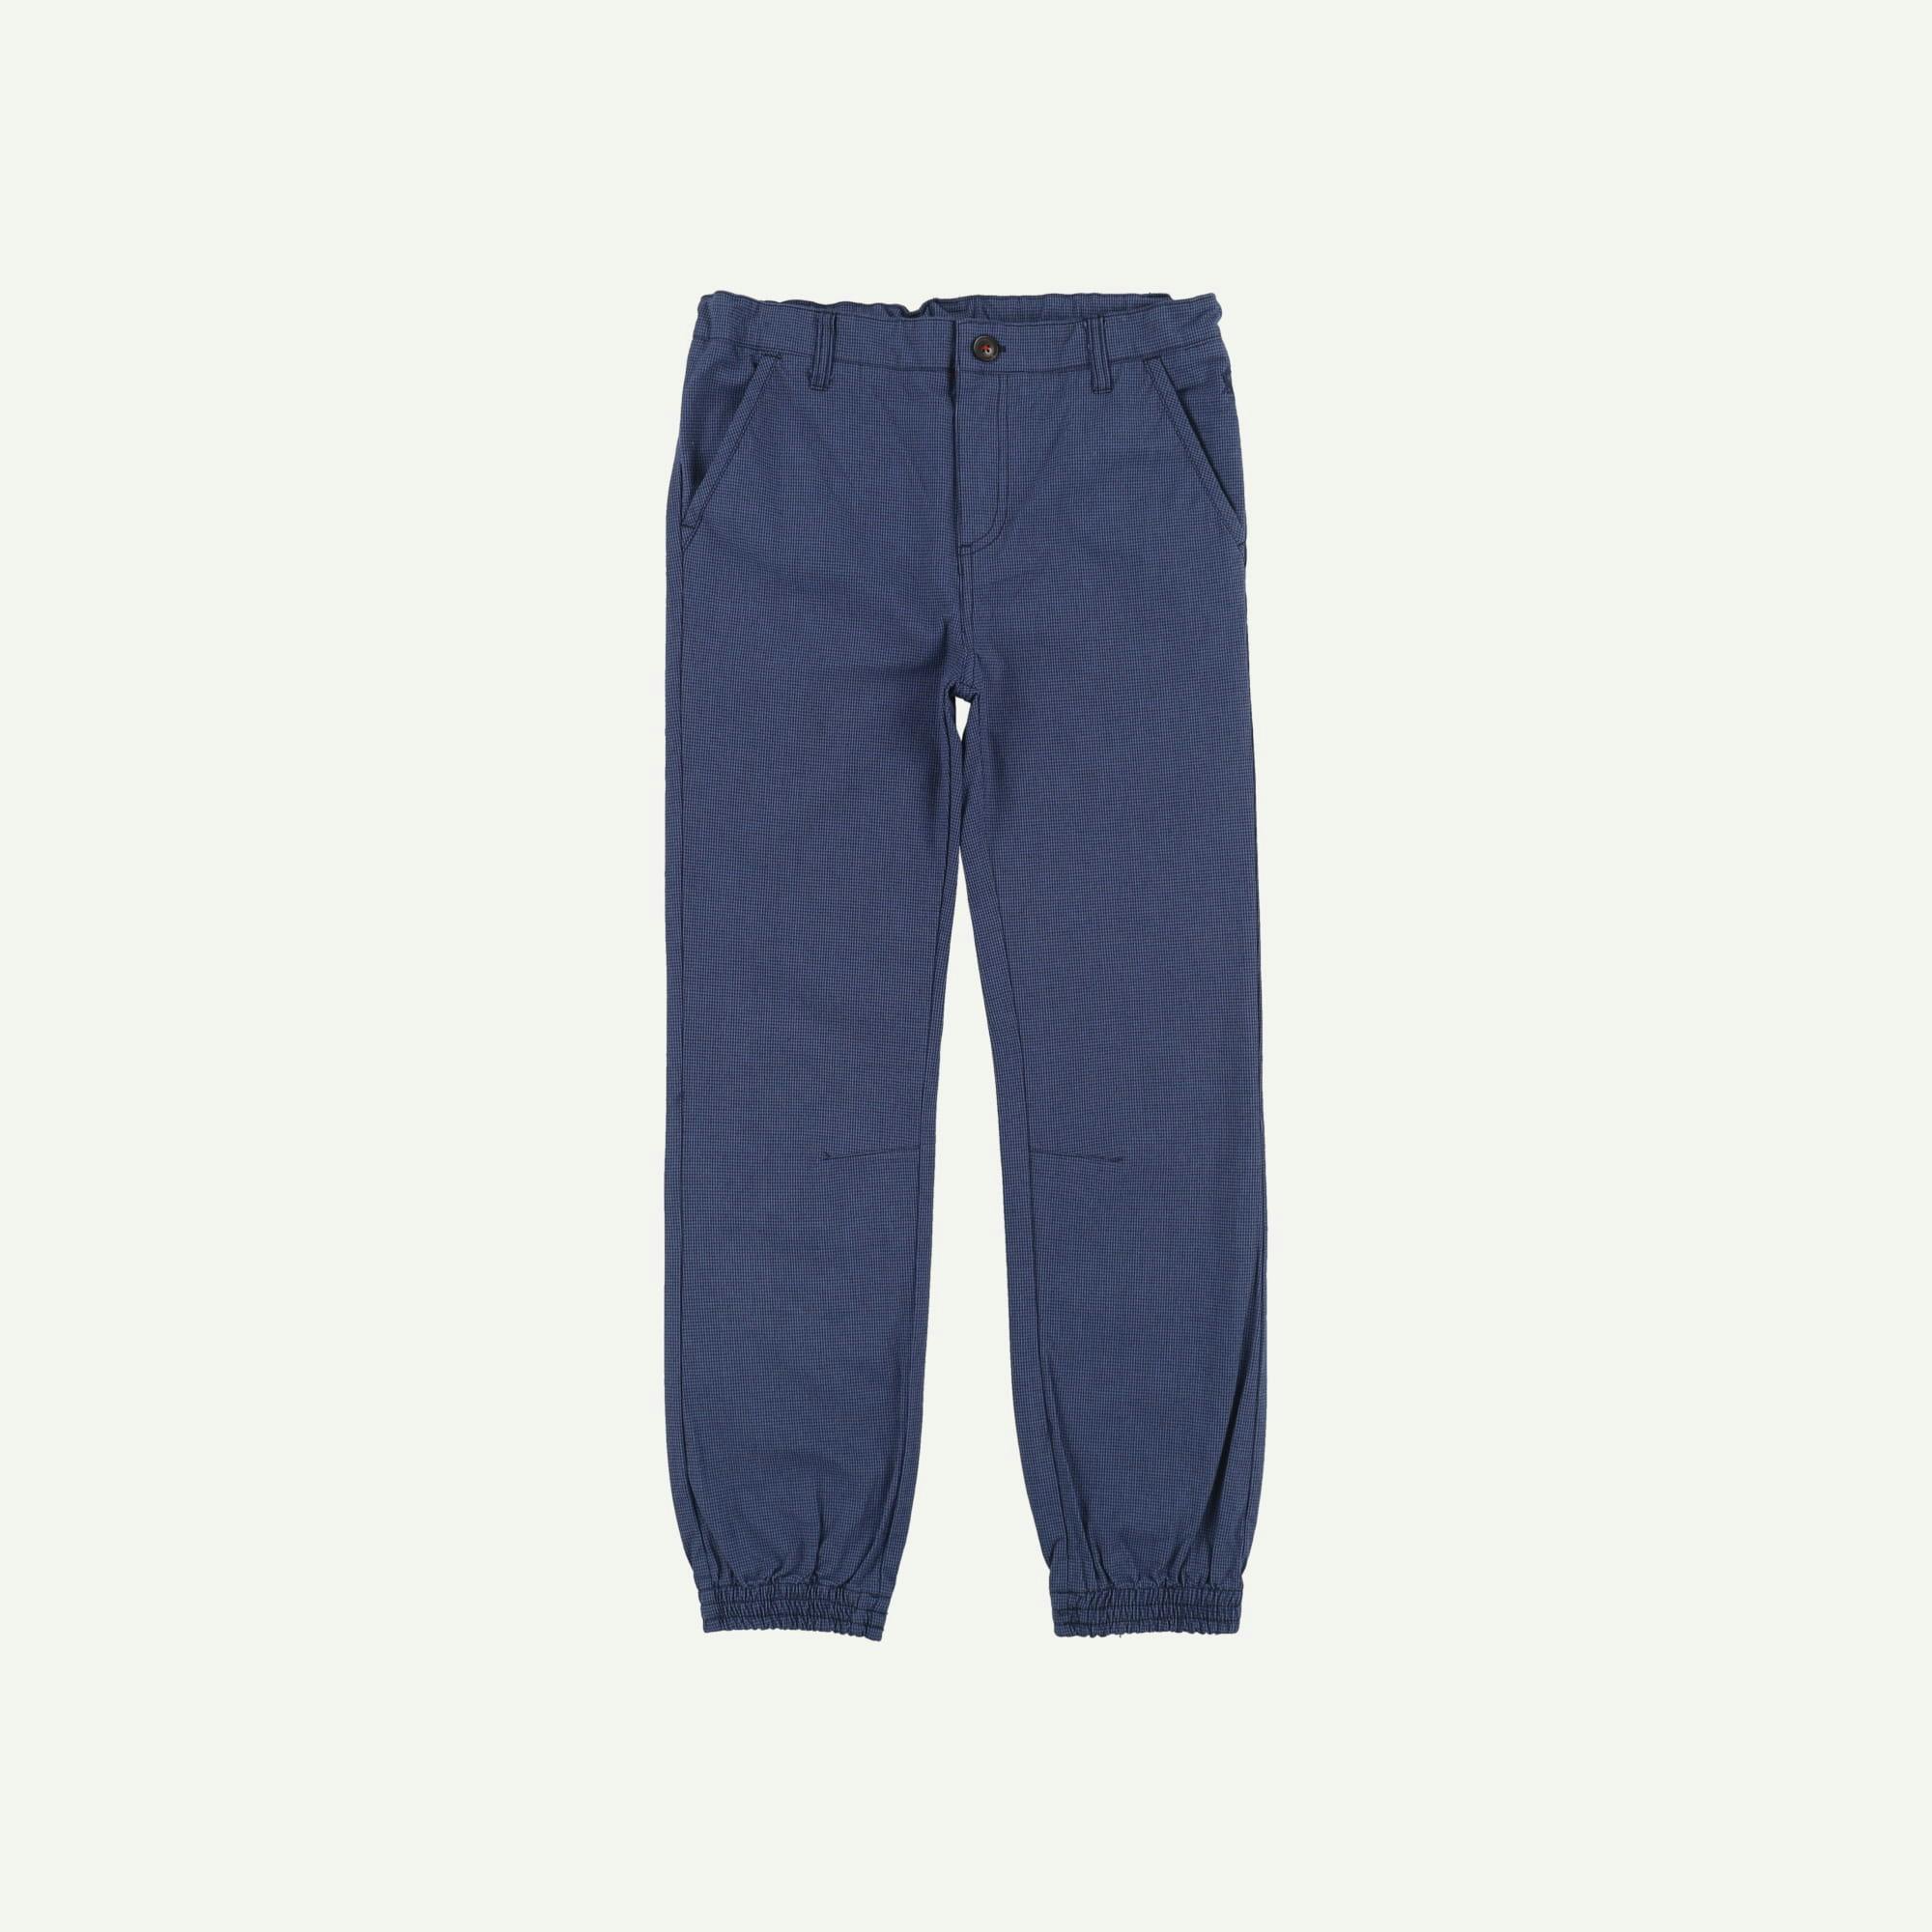 Joules As new Blue Trousers